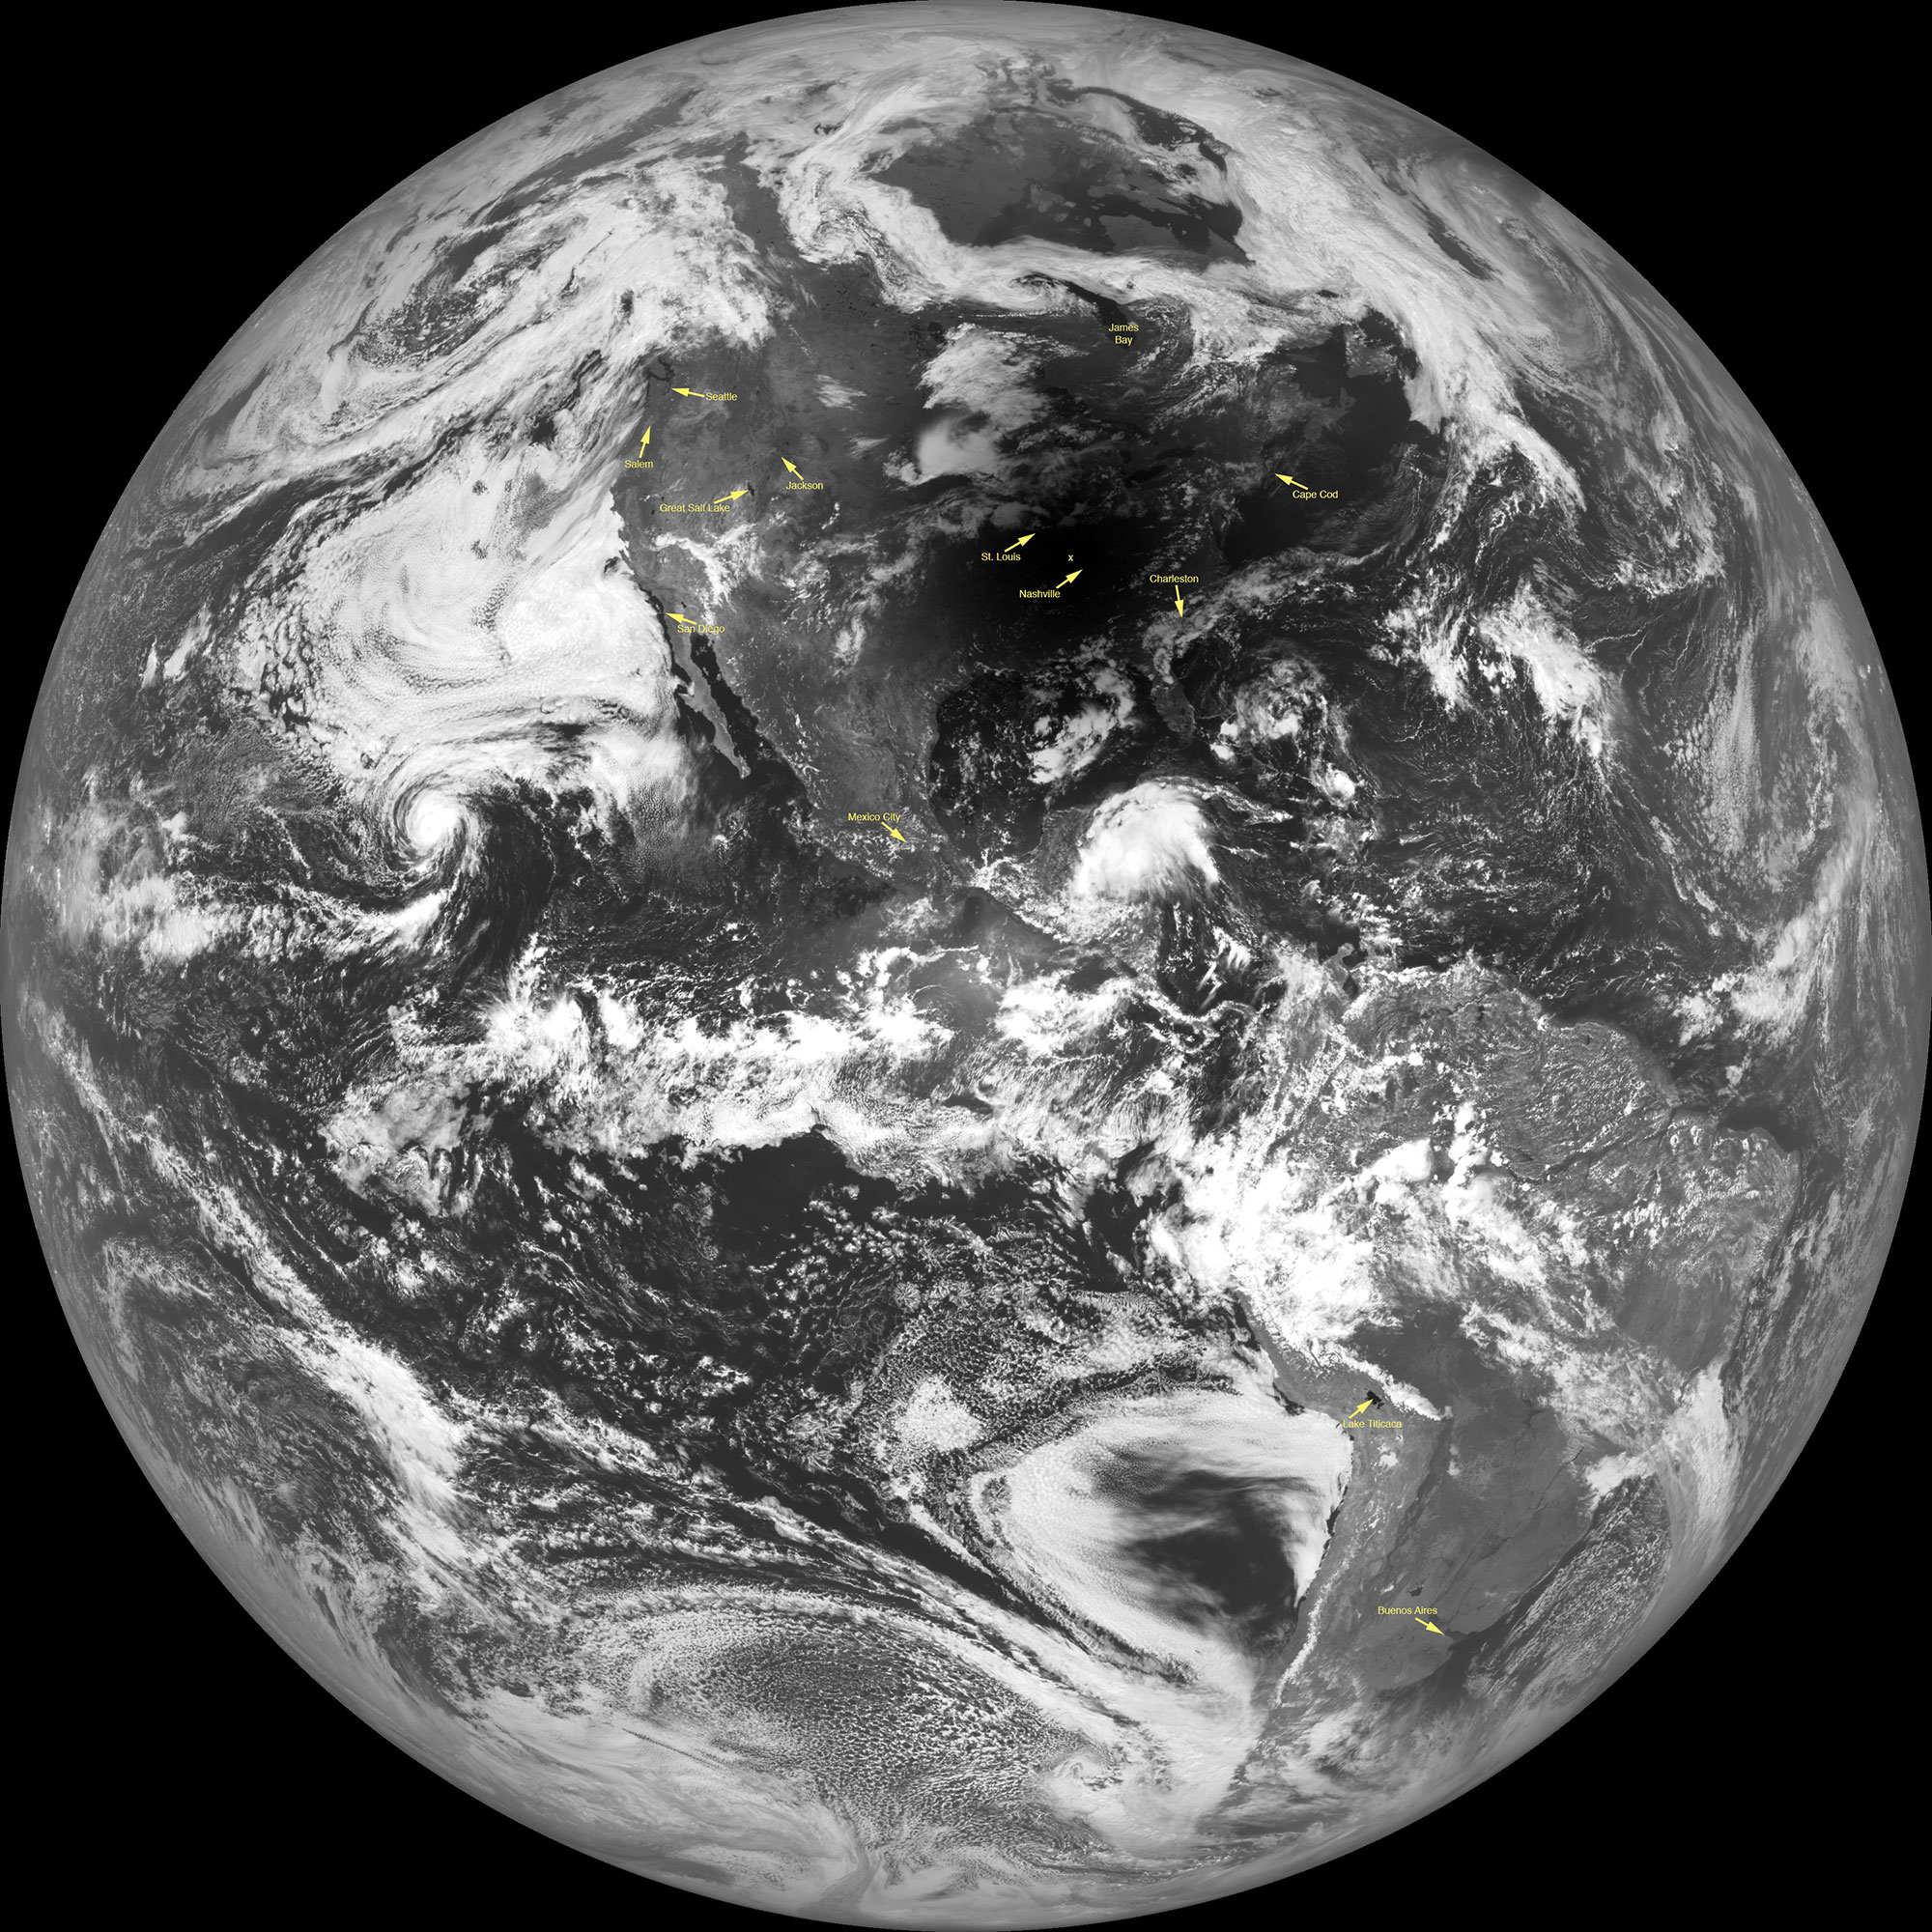 View of Earth during solar eclipse taken by LRO camera